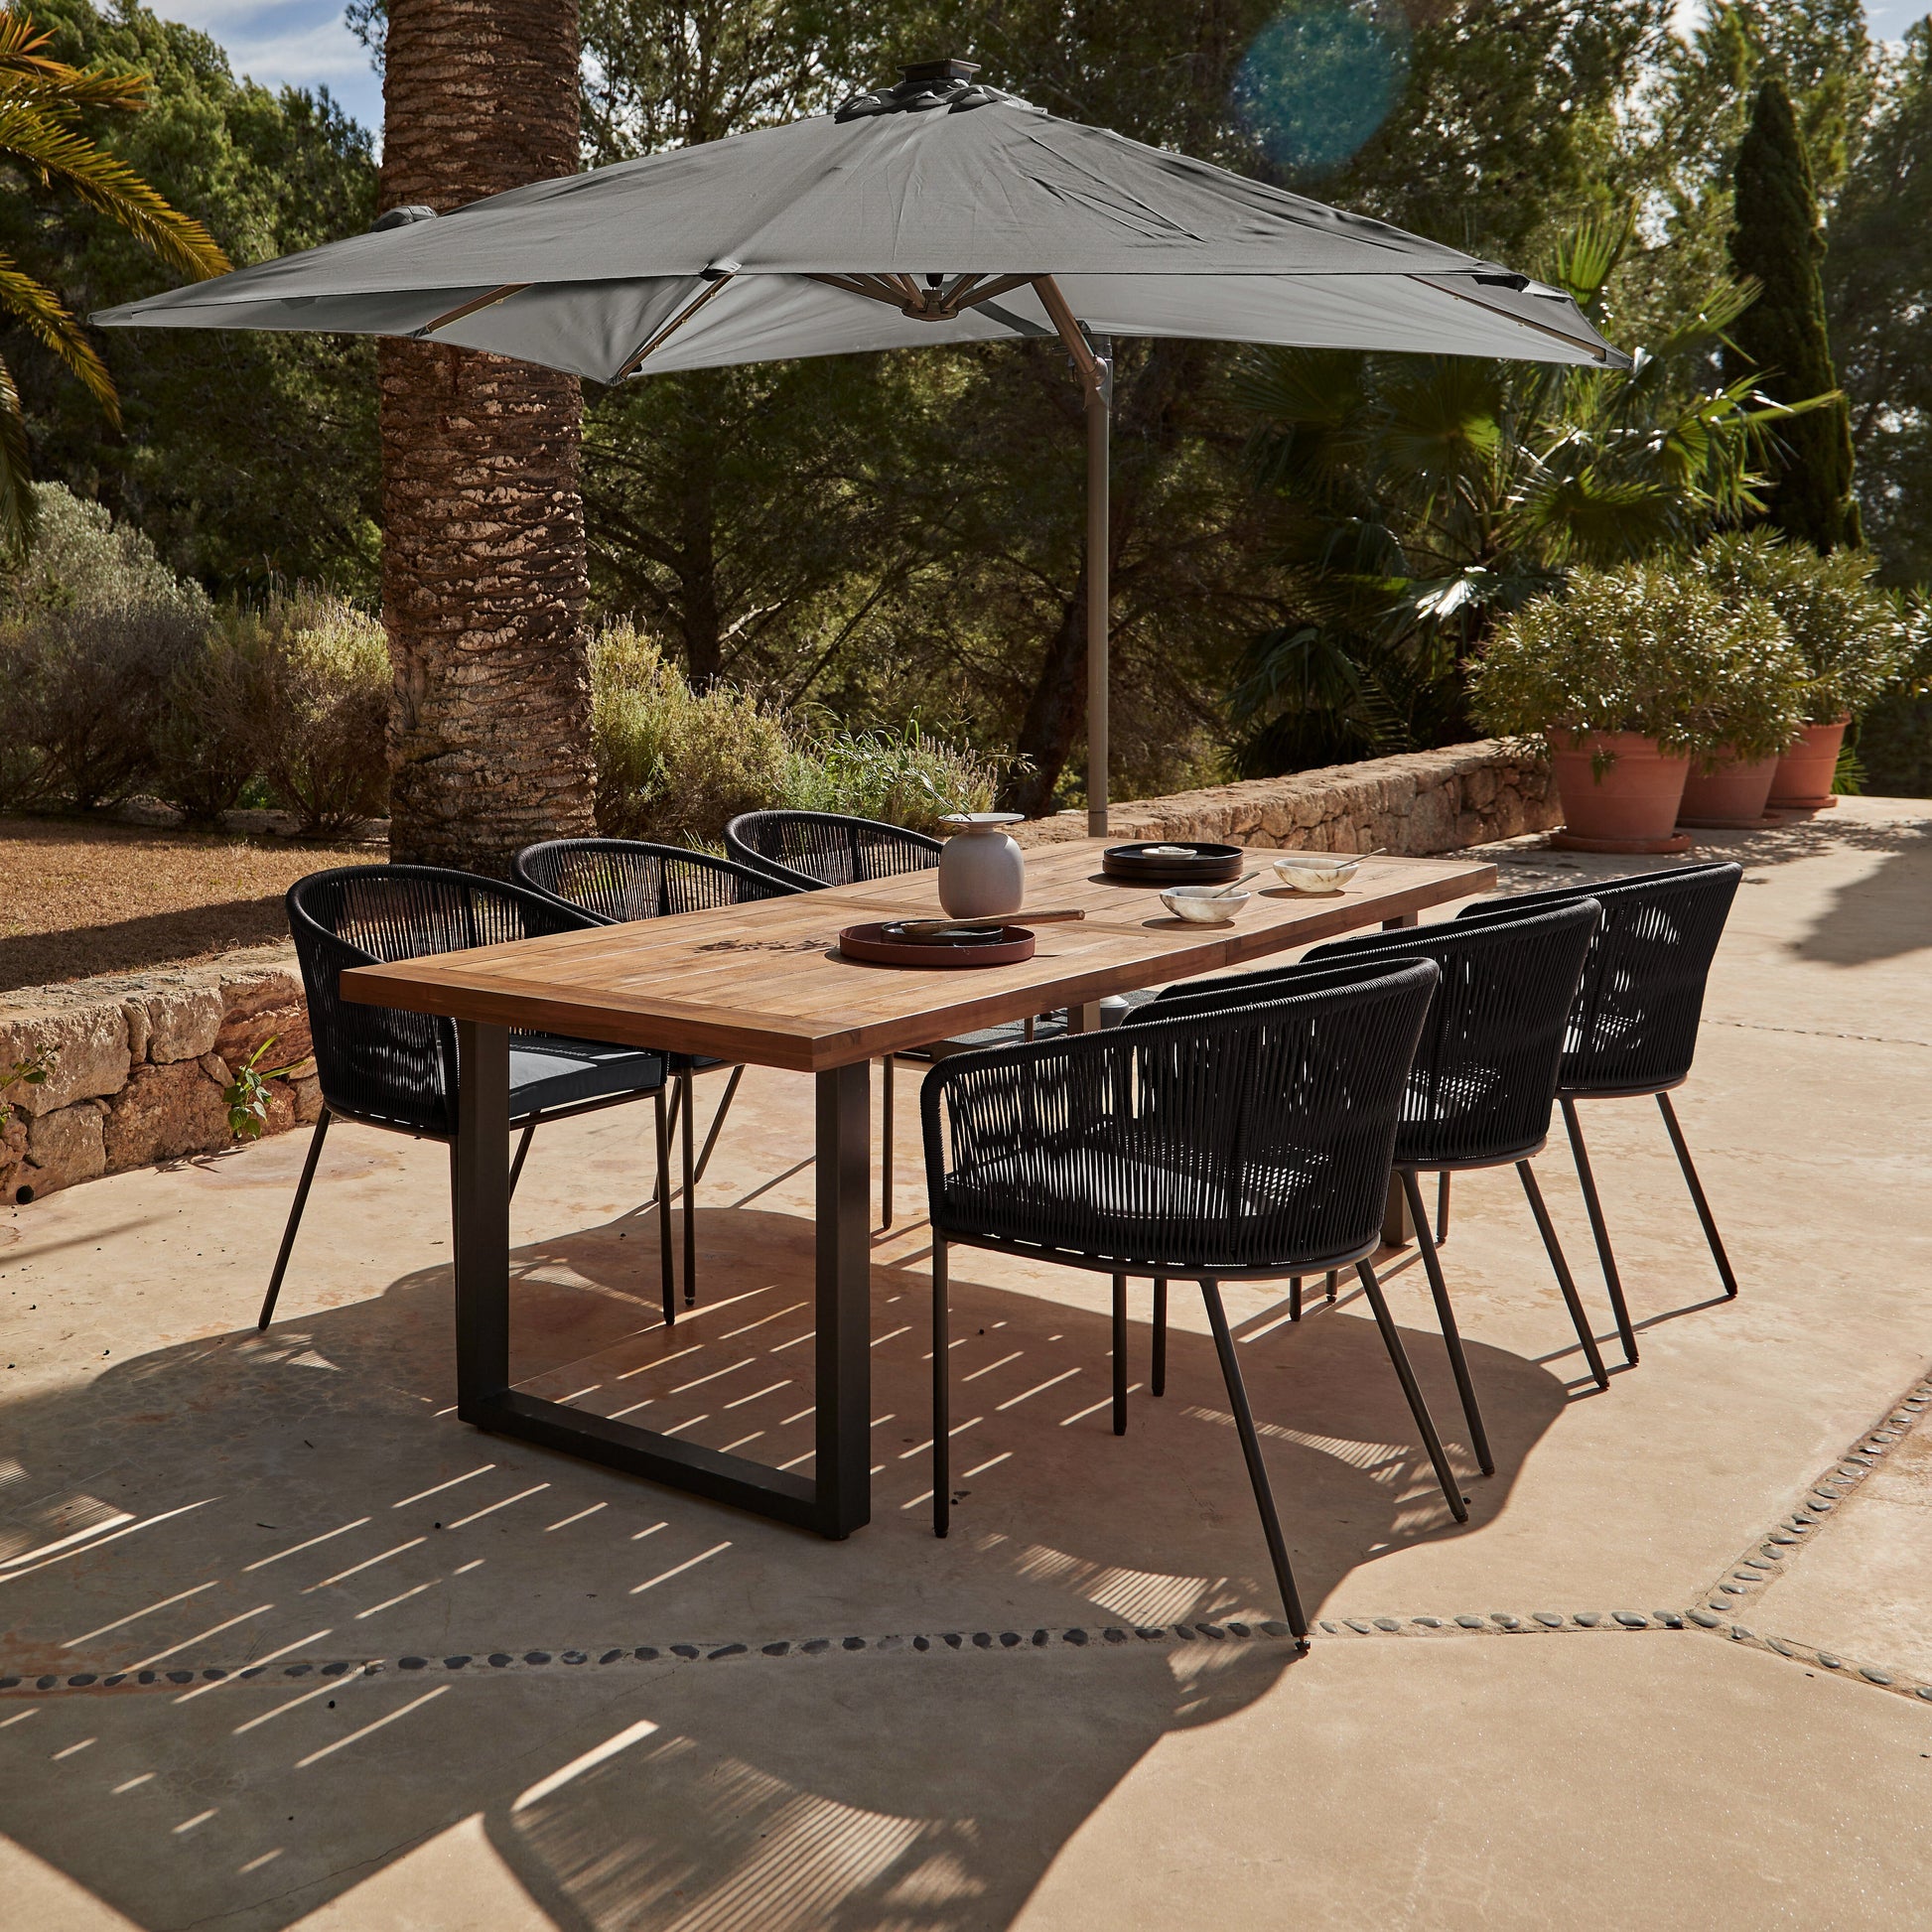 Hali 6 Seater Wooden Outdoor Dining Set with Hali Black Chairs & Grey Premium Cantilever Parasol - 235cm